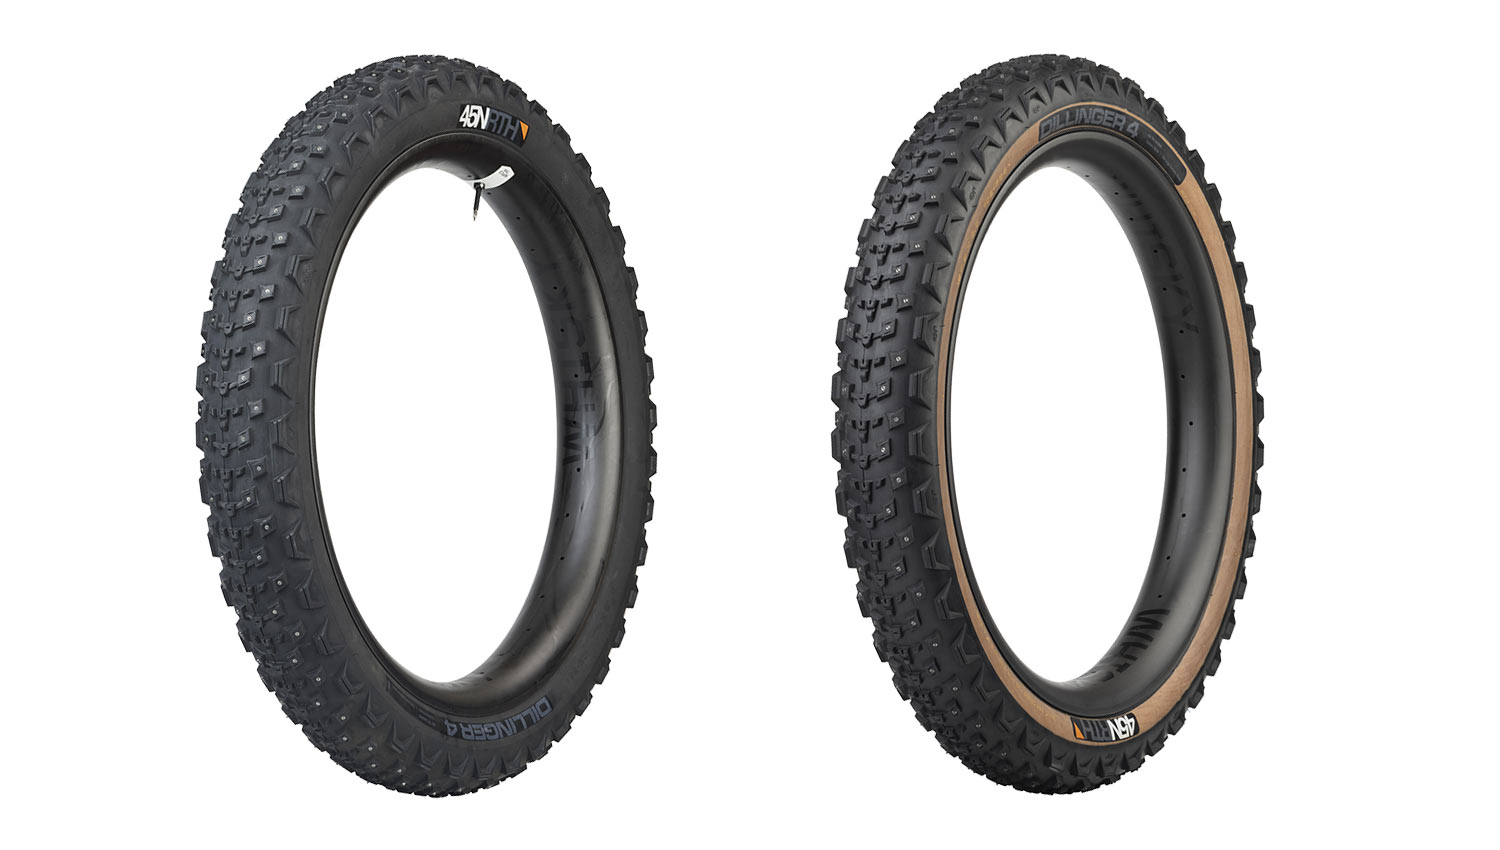 45Nrth Winter 2023-24 teaser, redesigned Dillinger 4 fast rolling fatbike tires, black or tan wall